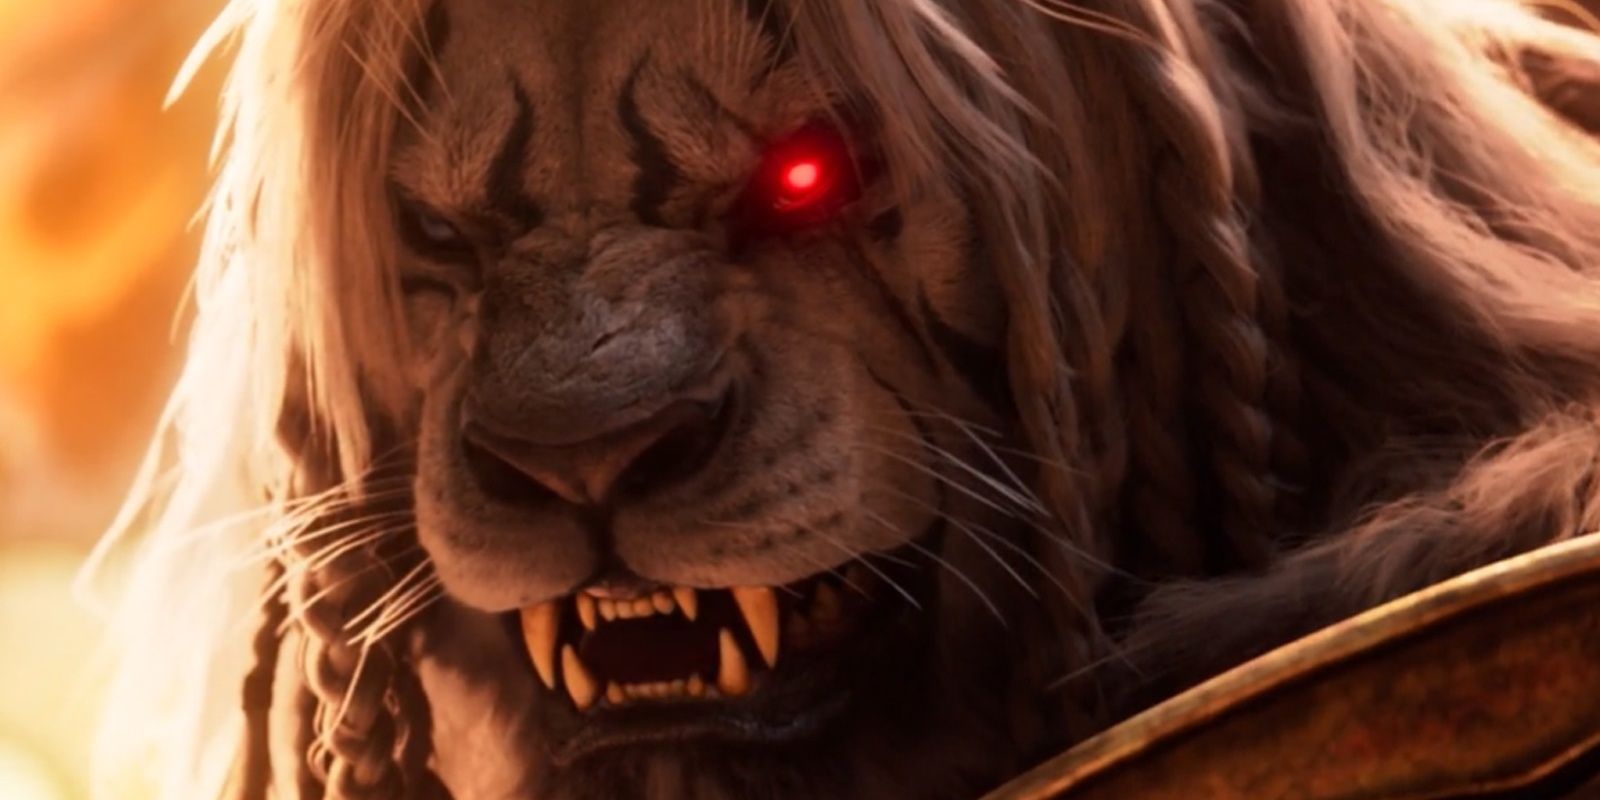 ajani goldmane in his compleated form with a glowing red eye in mtg